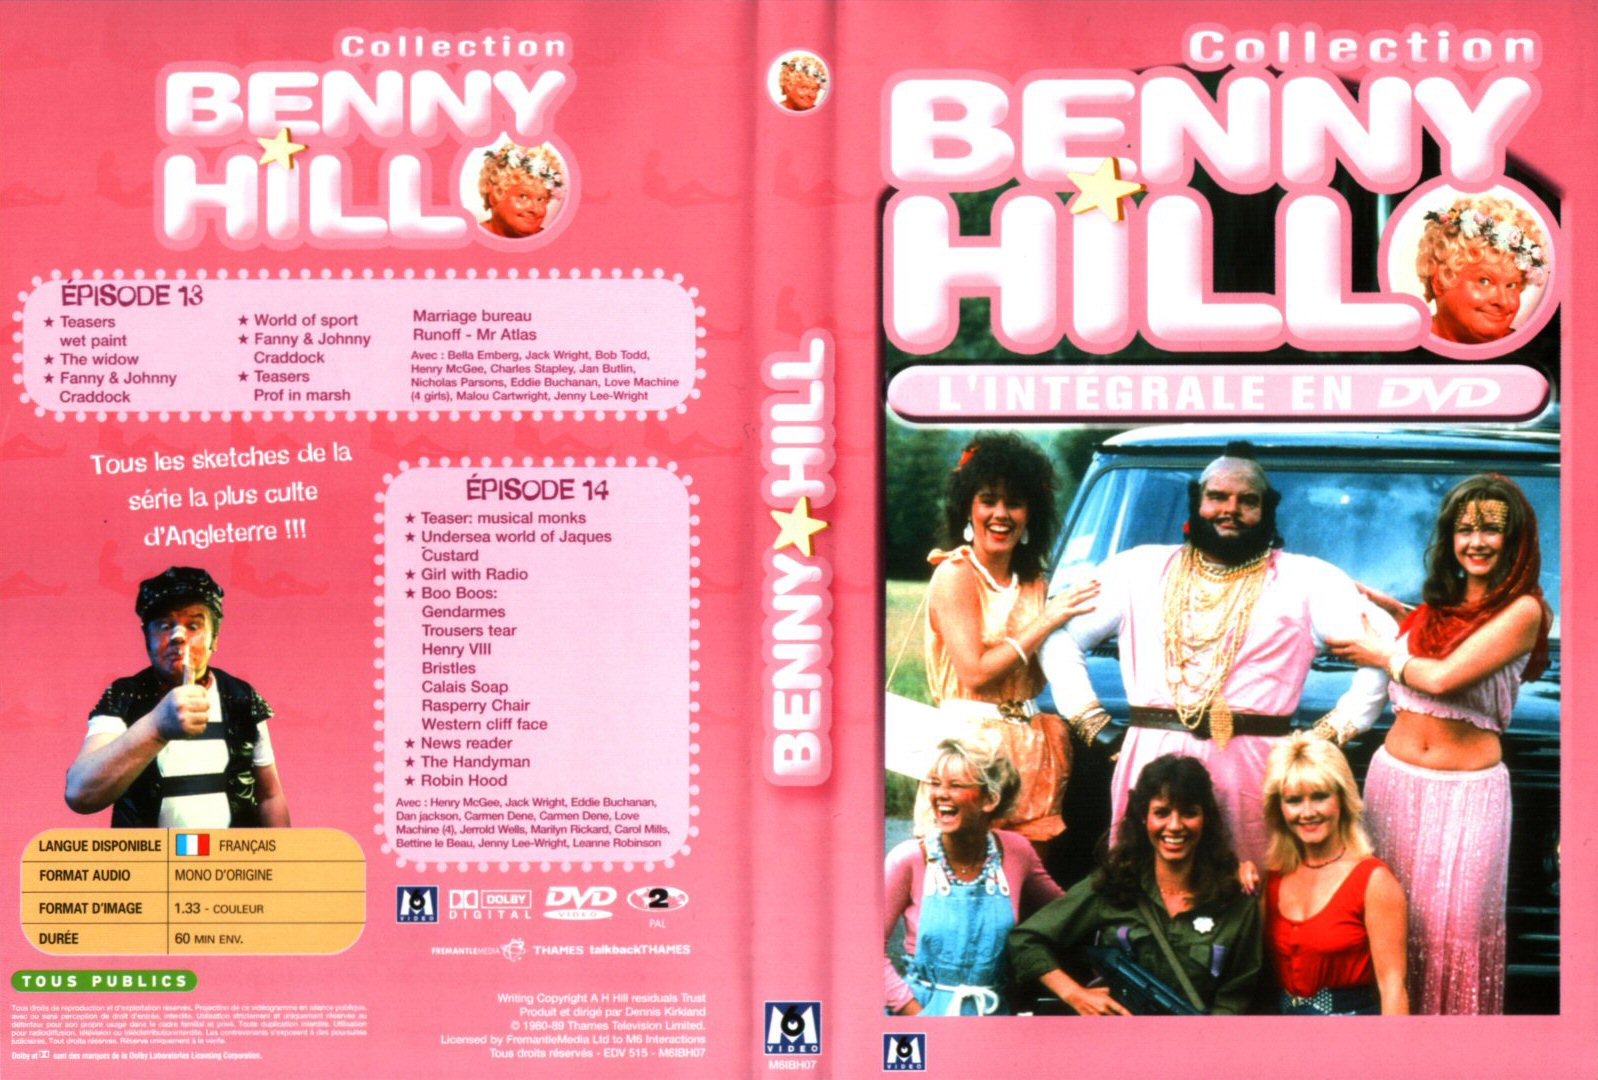 Jaquette DVD Benny Hill collection Episodes 13-14